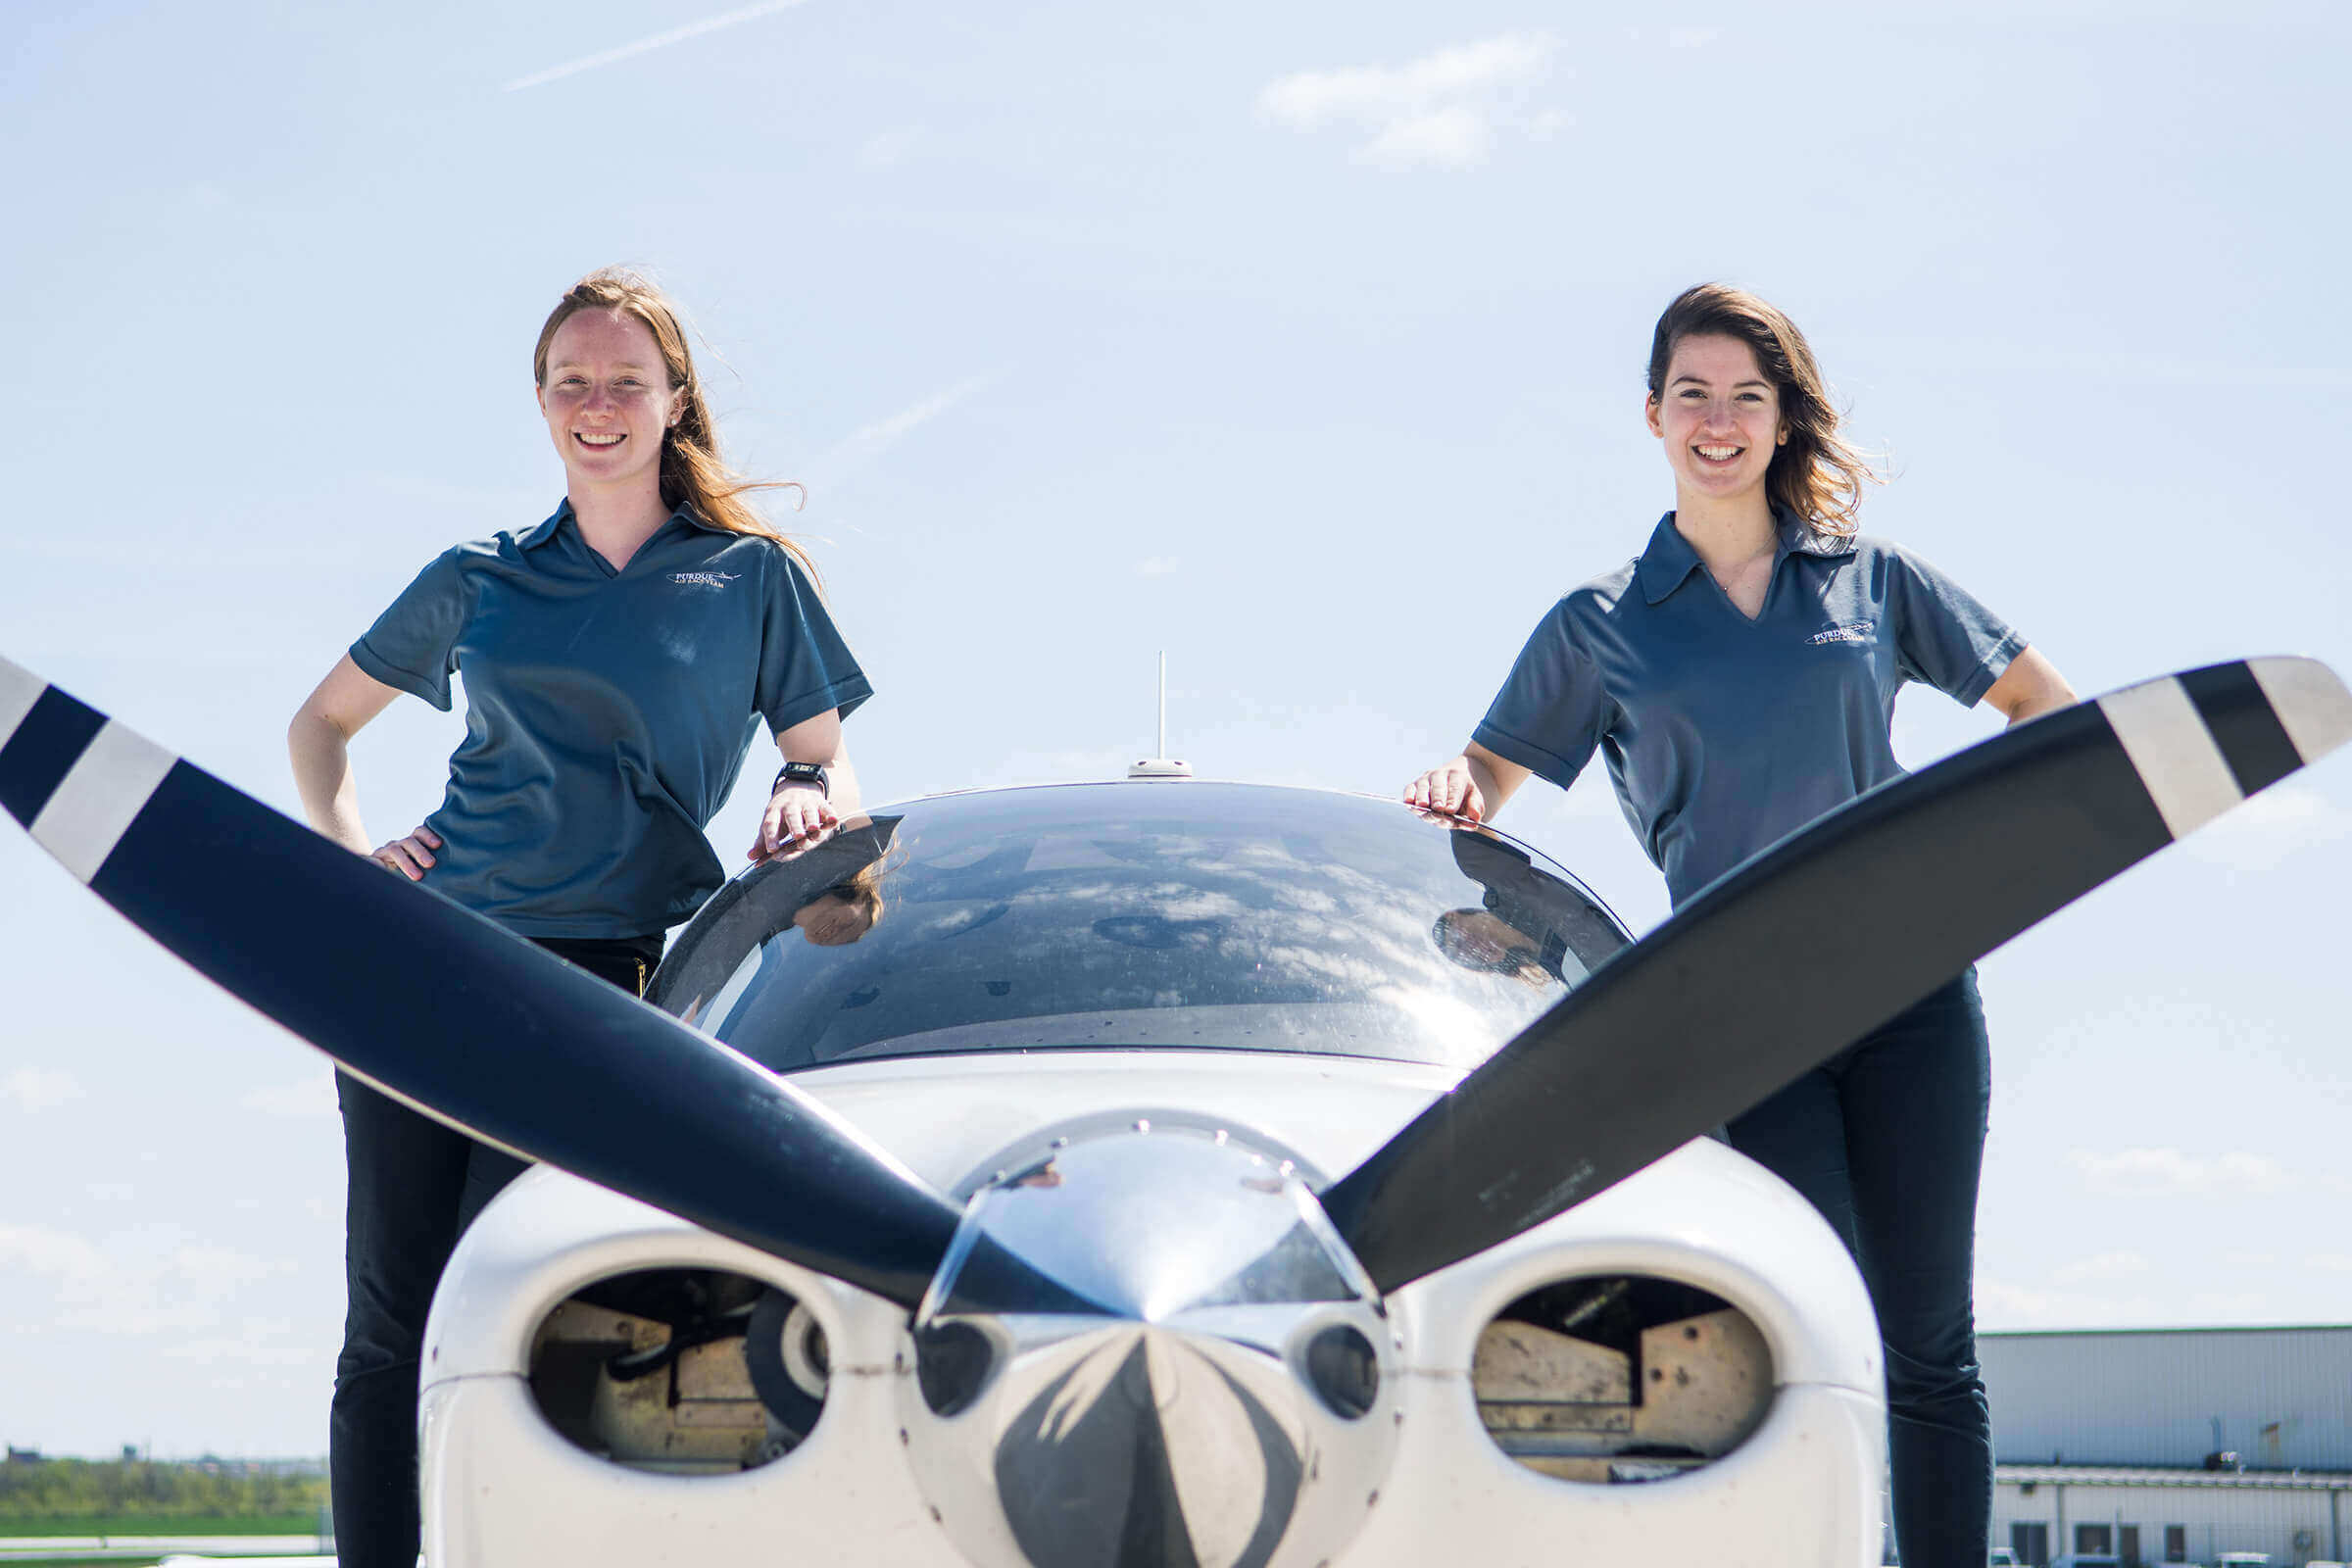 Purdue female pilots ready to take off in crosscountry aviation race